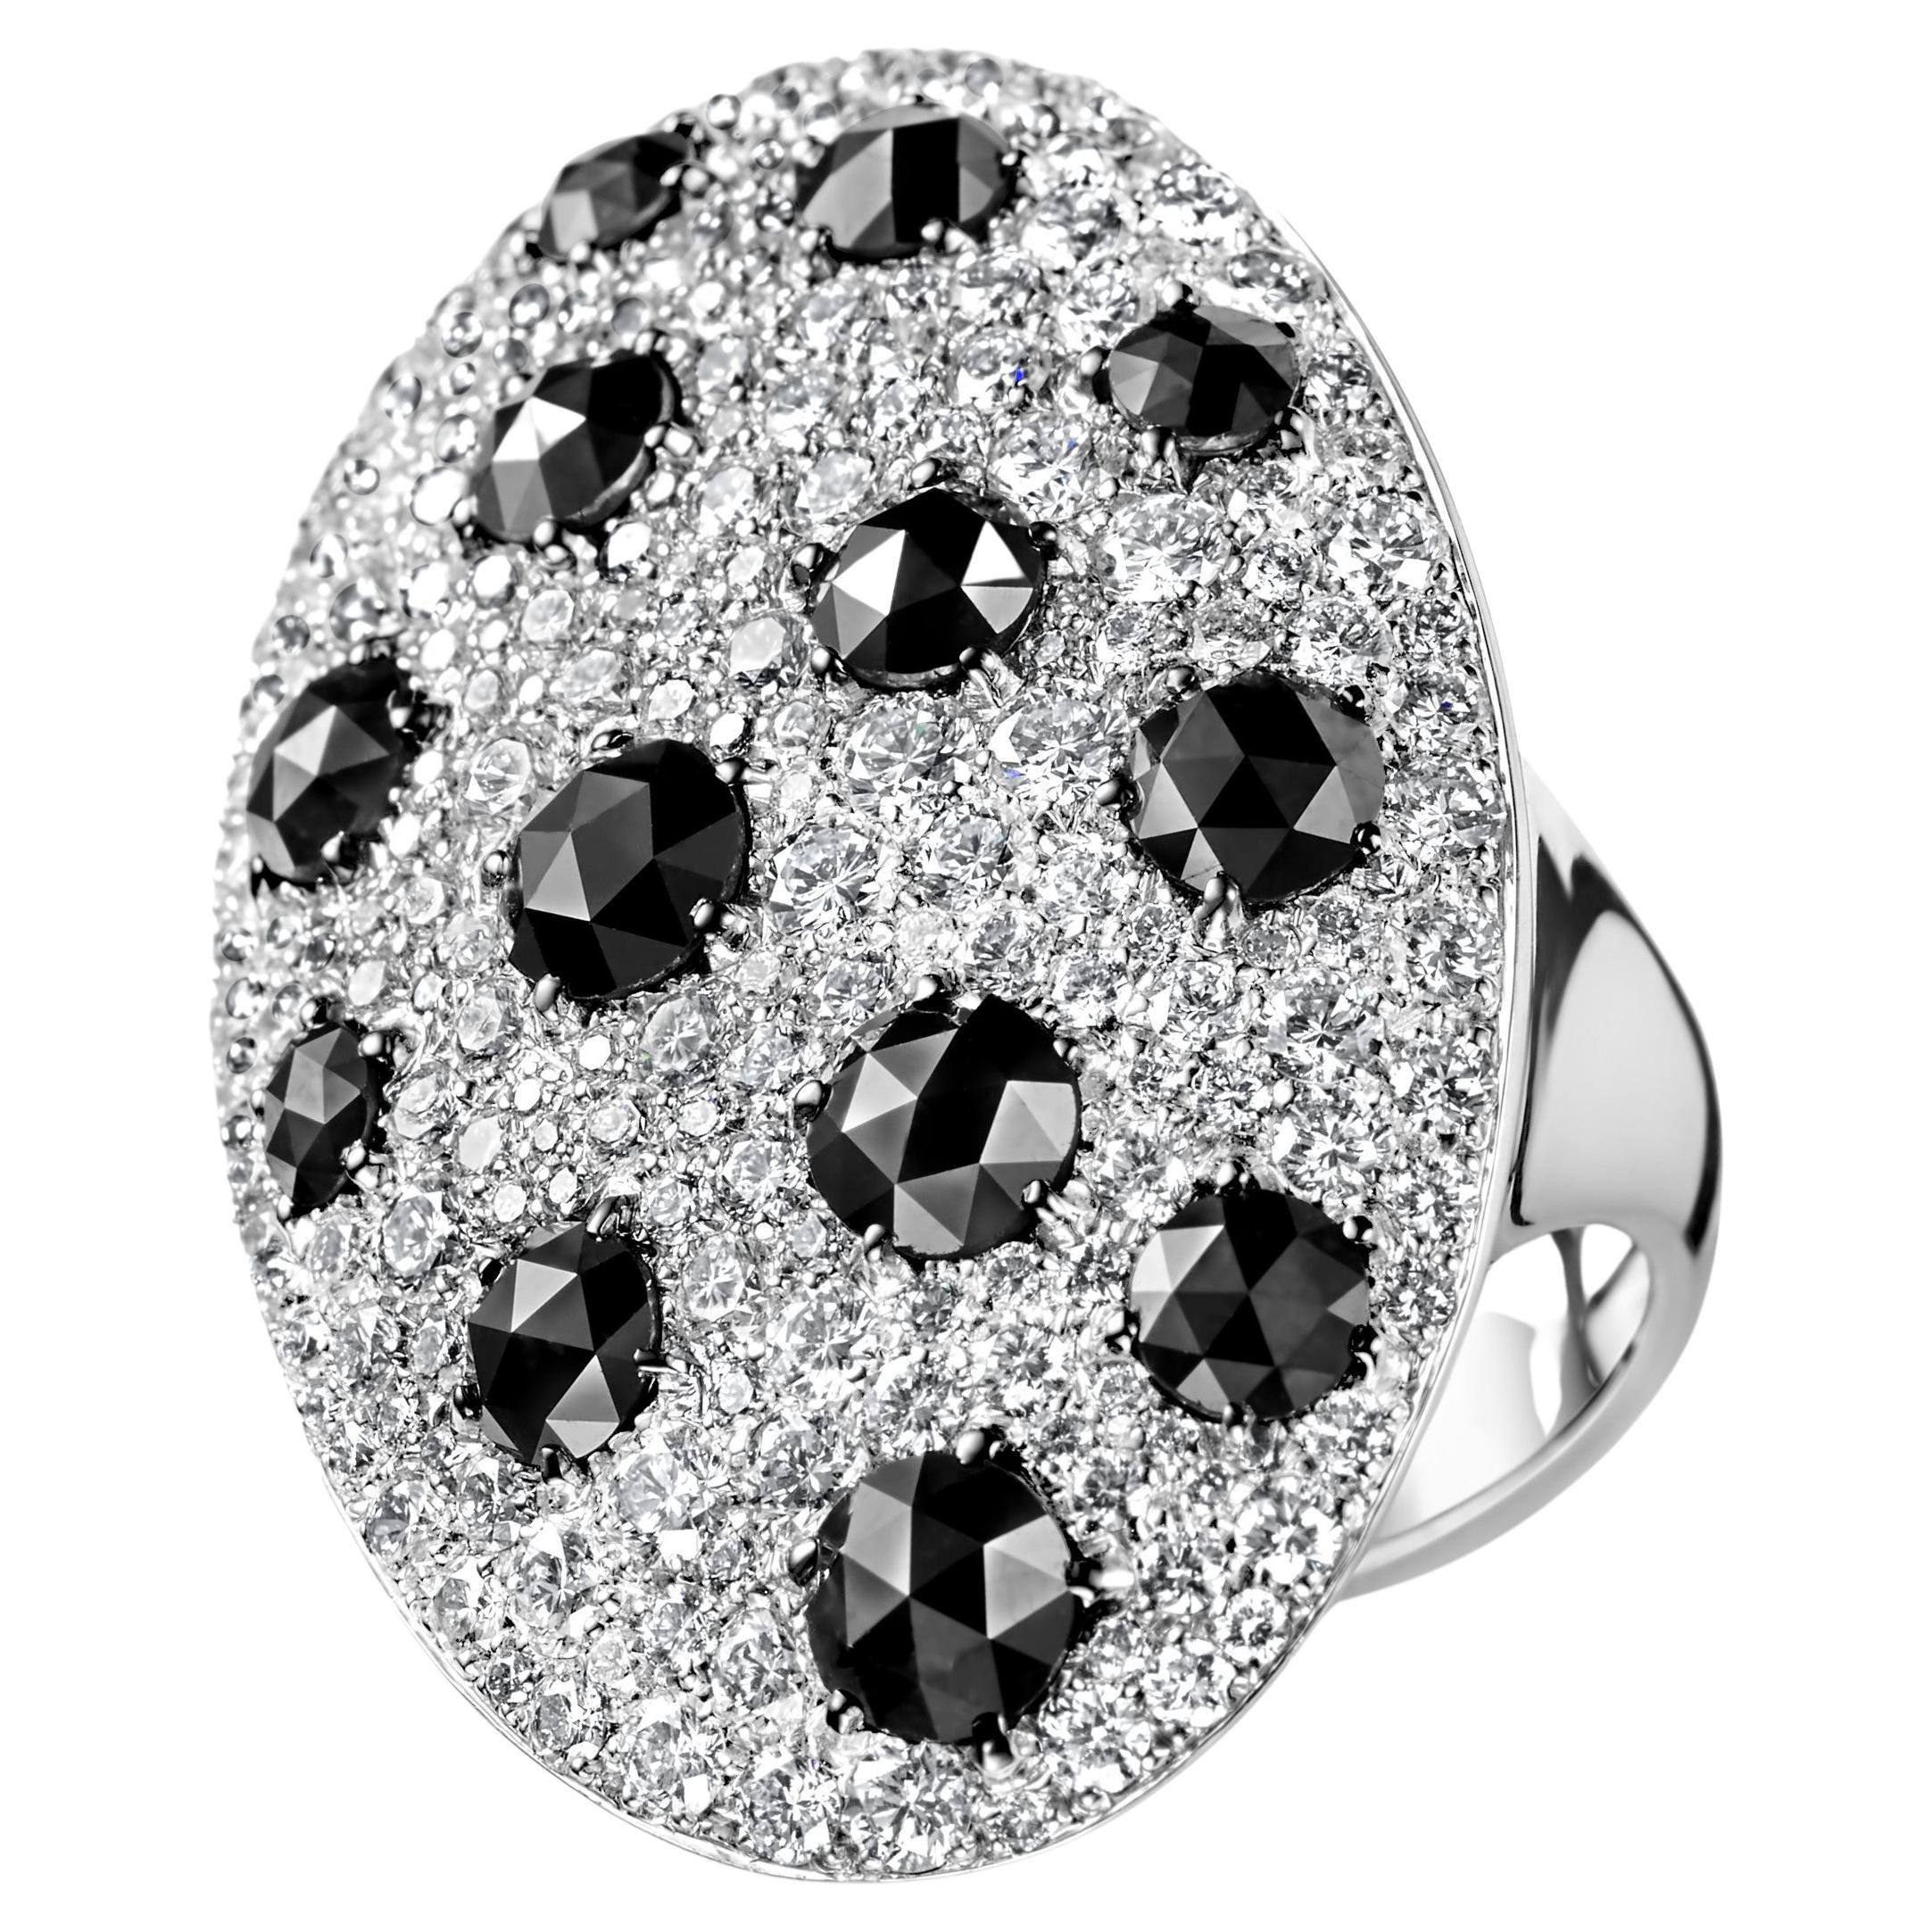 18kt White Gold Ring with 3.88 Ct Black & 3.87 Ct White Diamonds